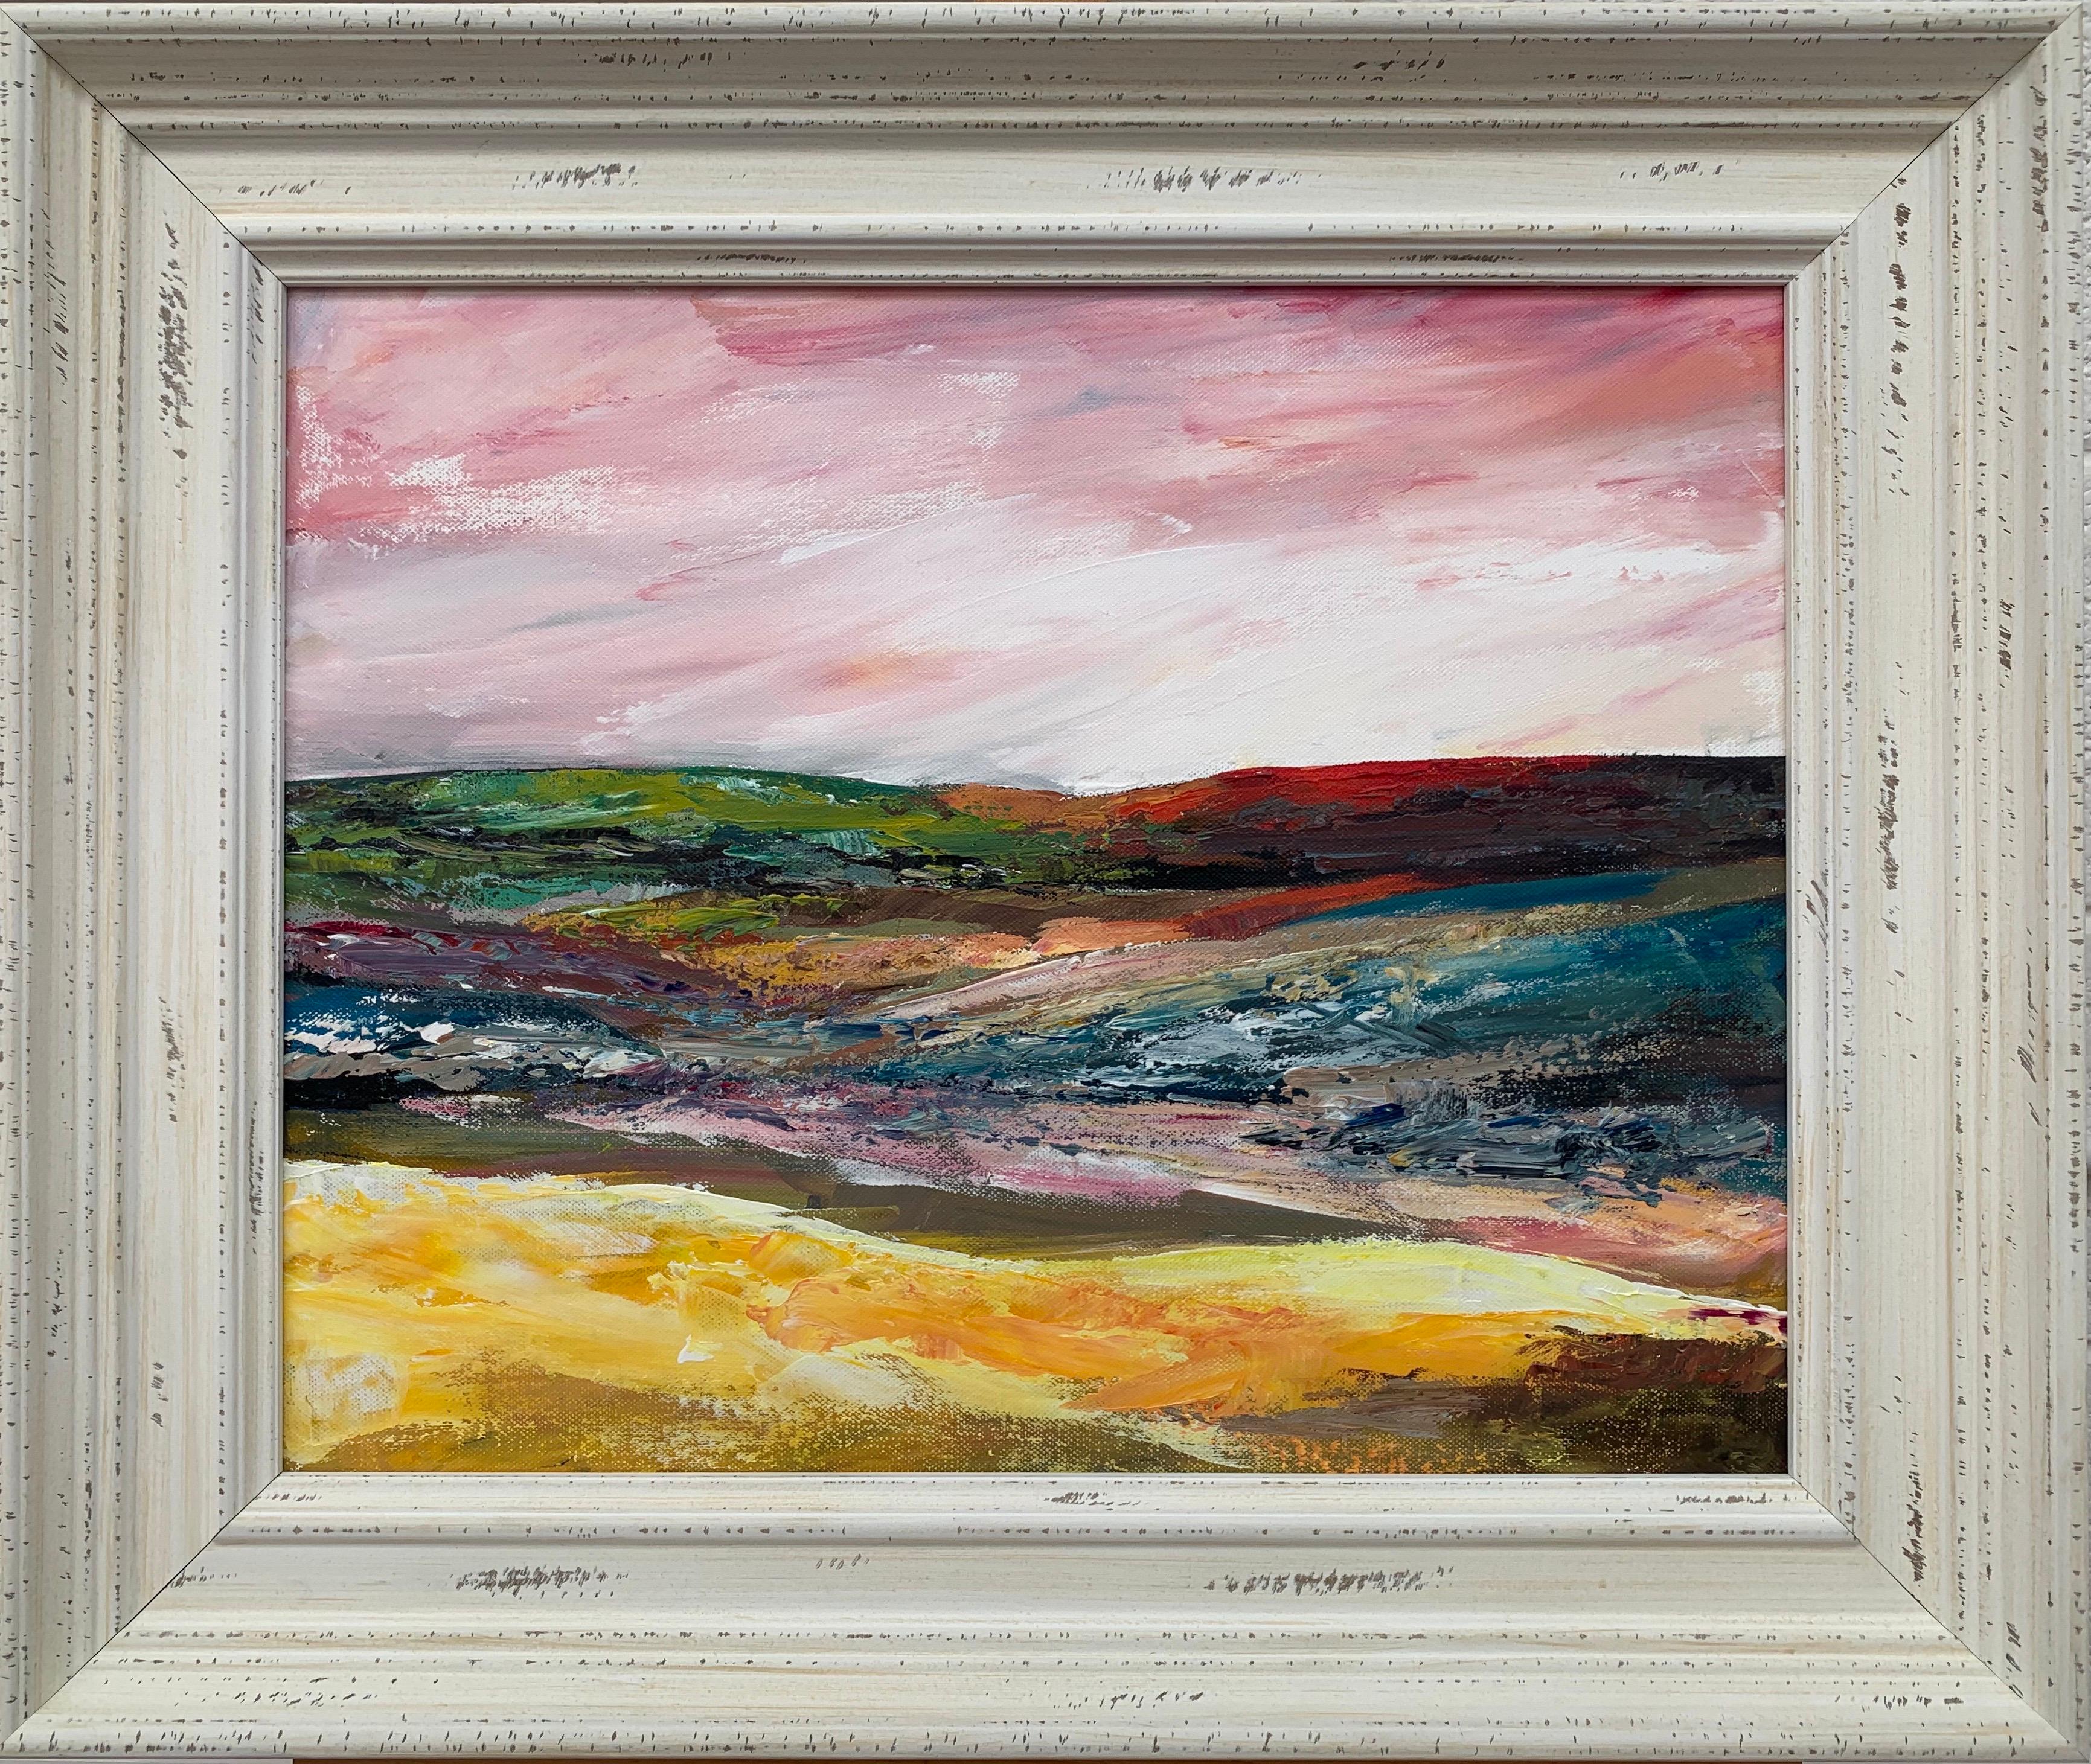 Angela Wakefield Landscape Painting - Colourful English Moor Landscape with Pink Sky by Contemporary British Artist